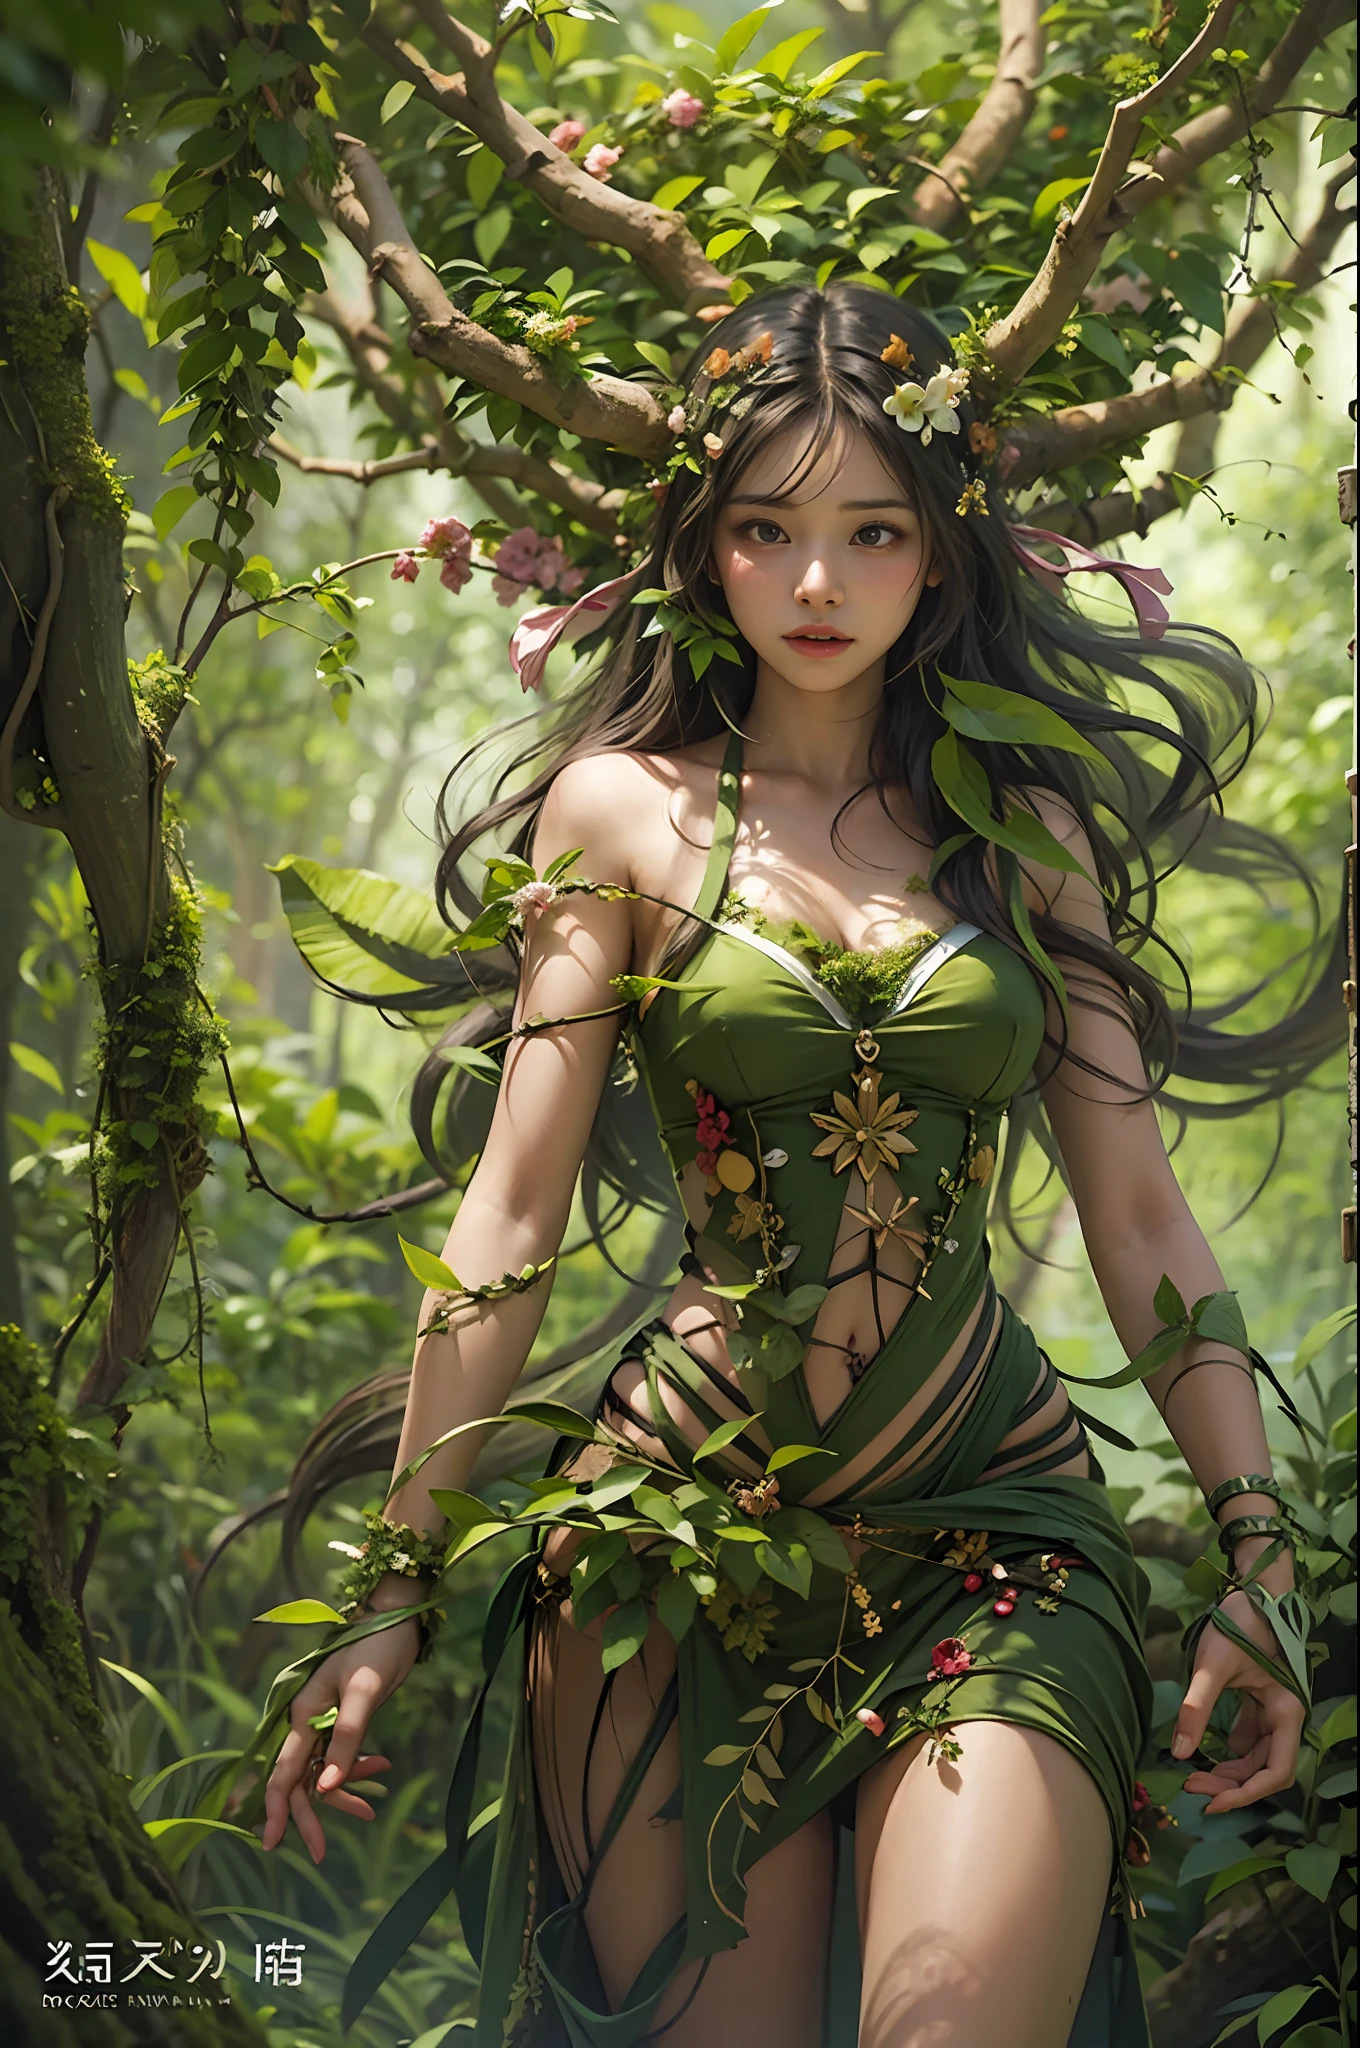 ​masterpiece, top-quality, 1 dryad、Slim body、small tits、exceptionally detailed anatomy, Leaf clothes、large leaves on the head,,,,,、lovely, emotive, Charming, Bewitching、Giant trees、Branch corridor、World Tree、Fantastical、Slim body、、beautiful countenance、Tree Spirit、In the deep forest、Nymphyth 、PsyAI、Dynamic angles